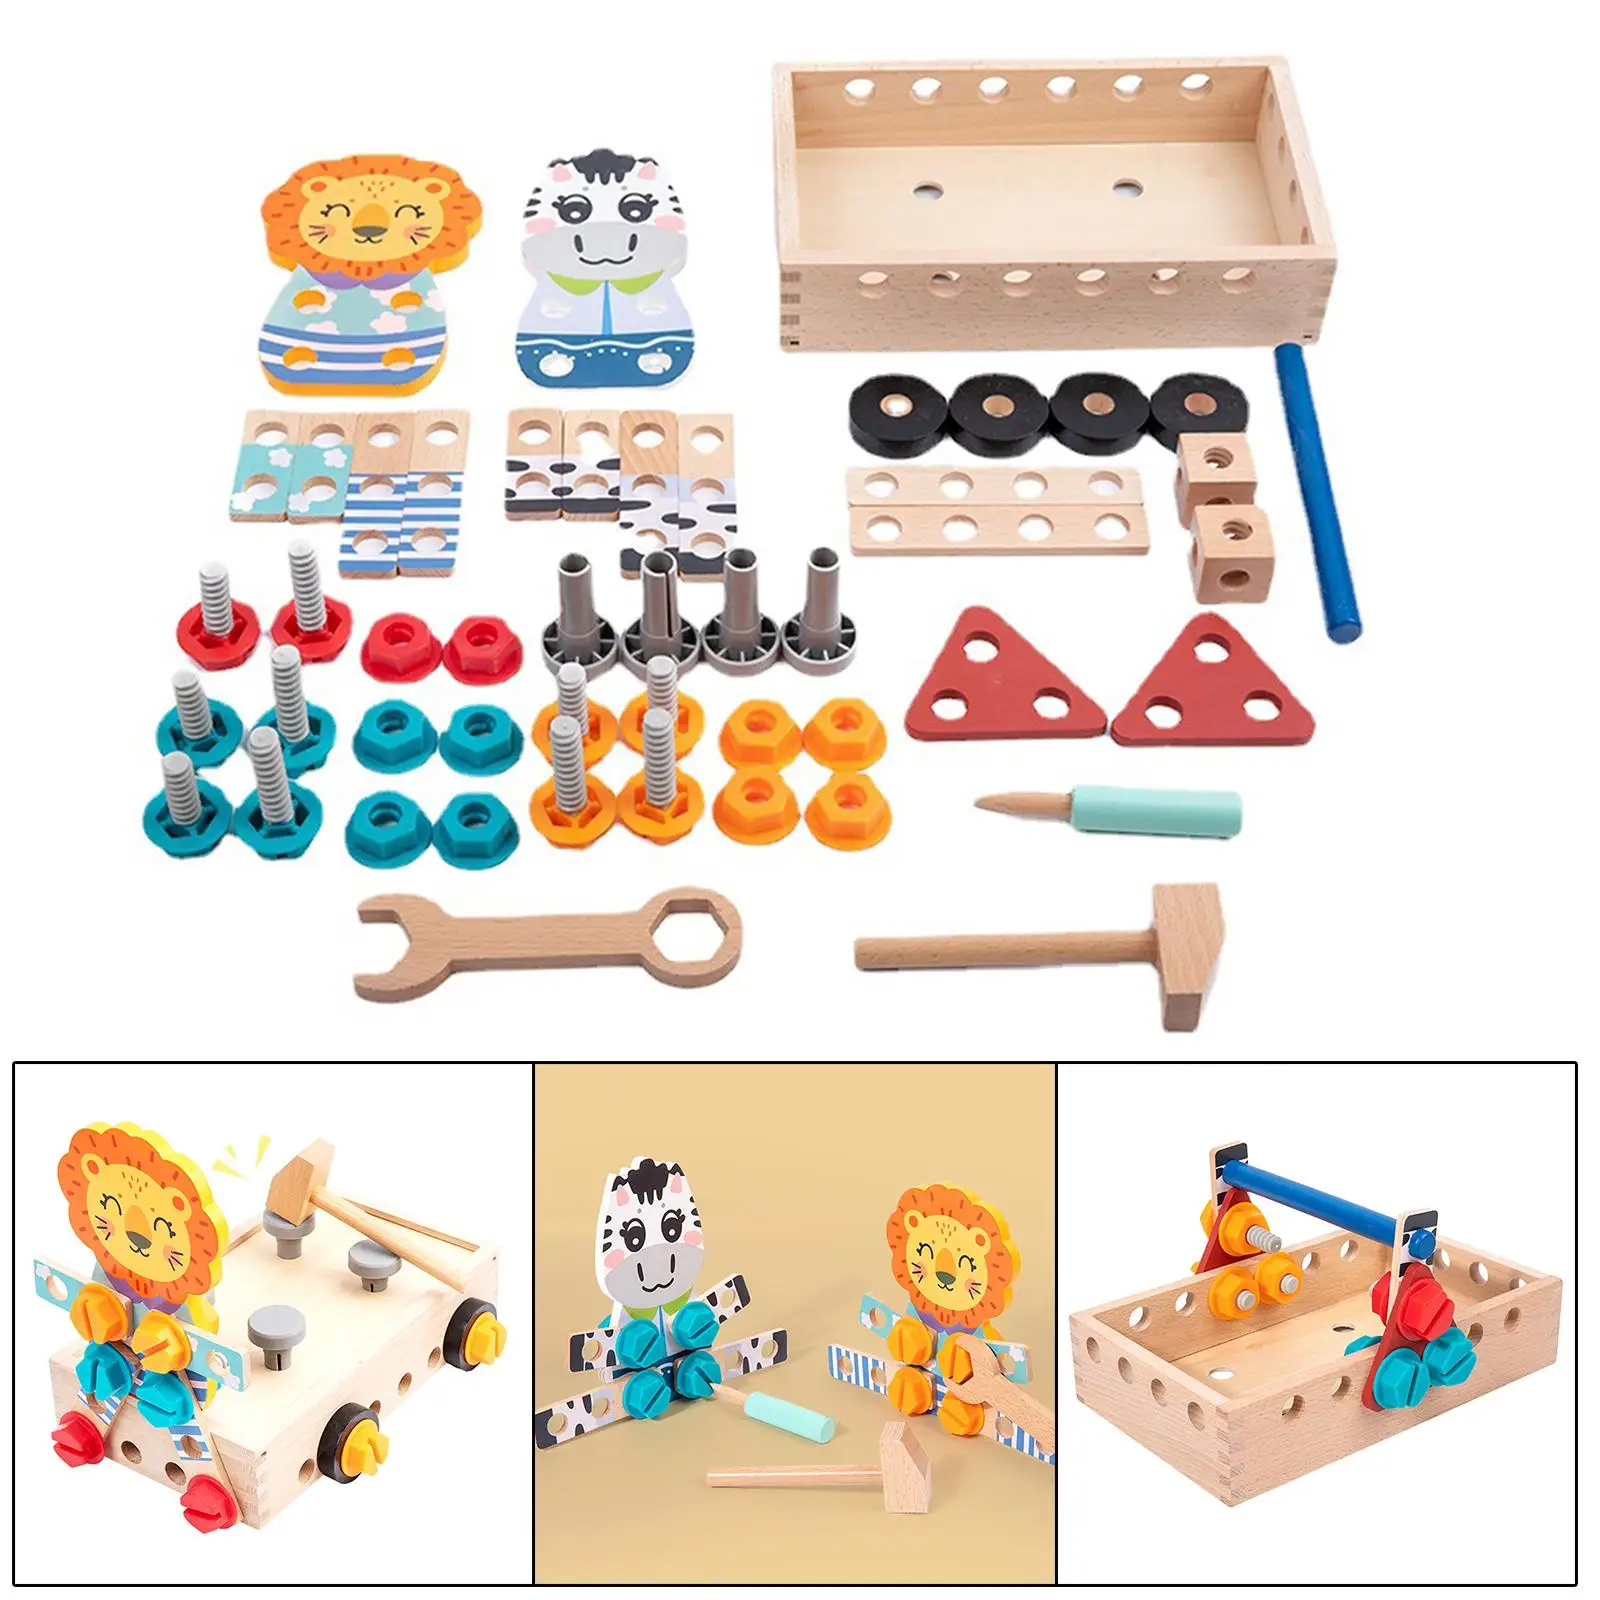 Kids Toolbox Set Creative Wooden Tool Set Pretend Game education Learning Activities Preschool Education Role Play